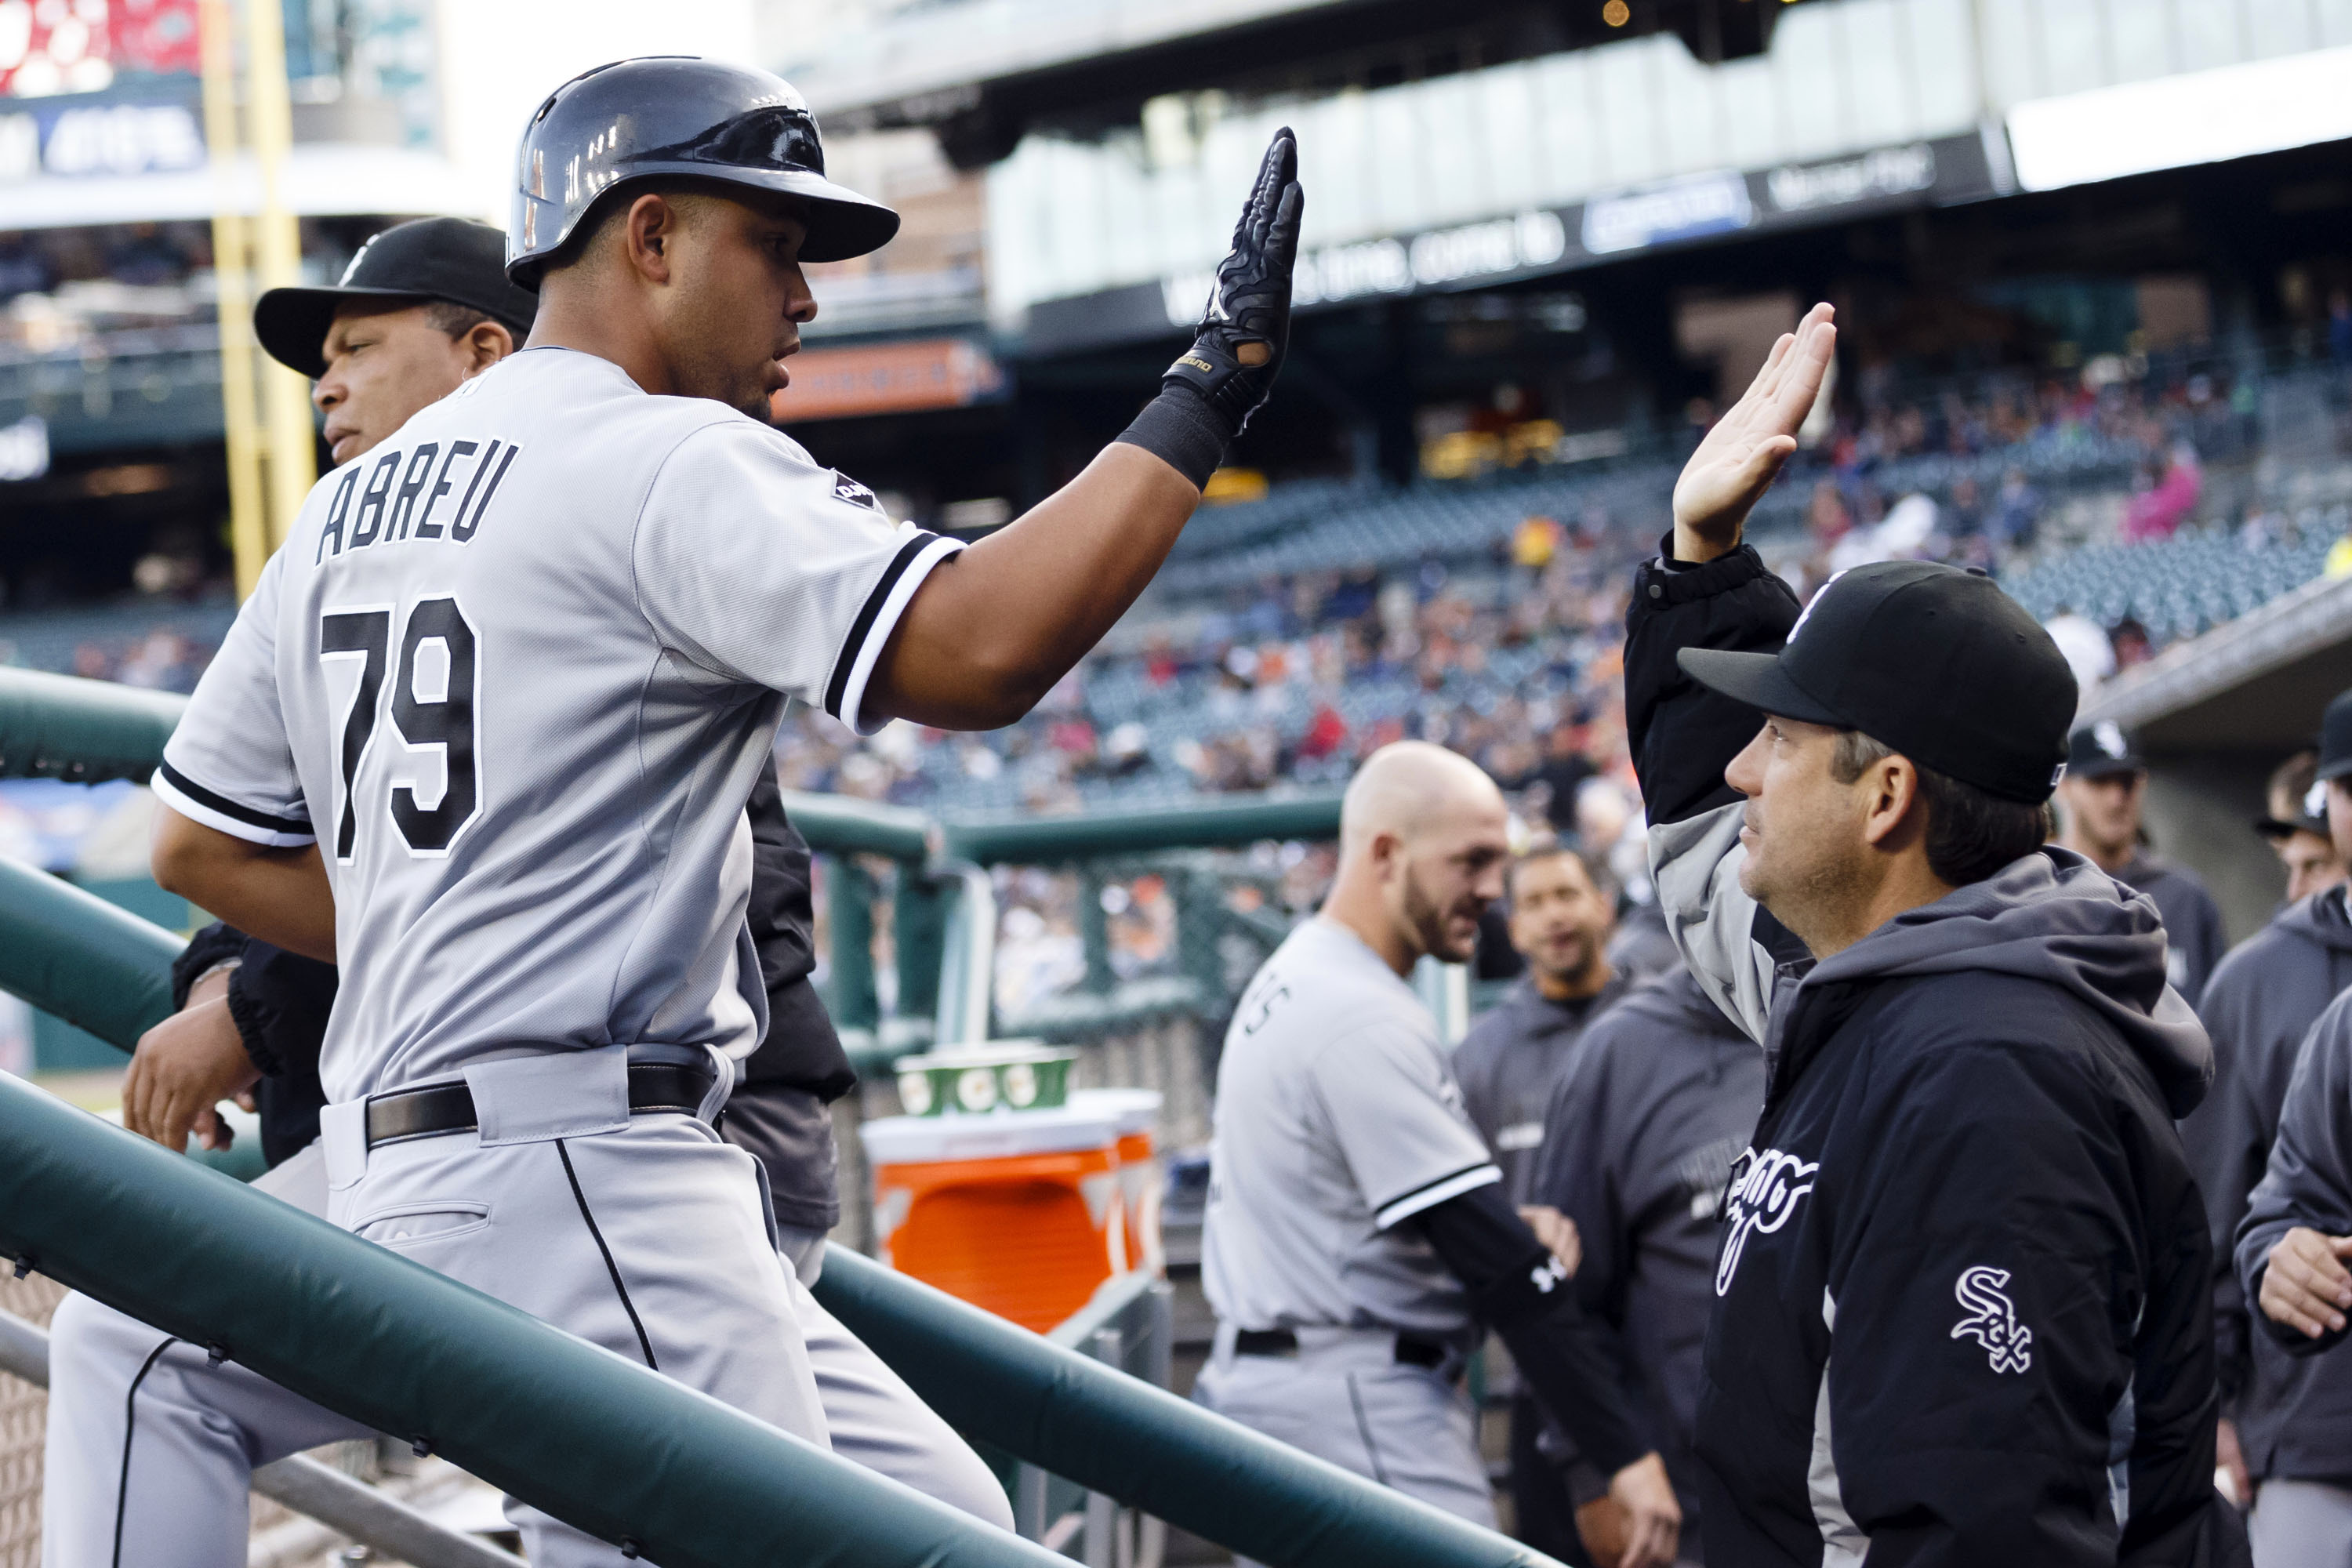 The White Sox have done a whirlwind rebuild around slugger Jose Abreu. (USA TODAY Sports)